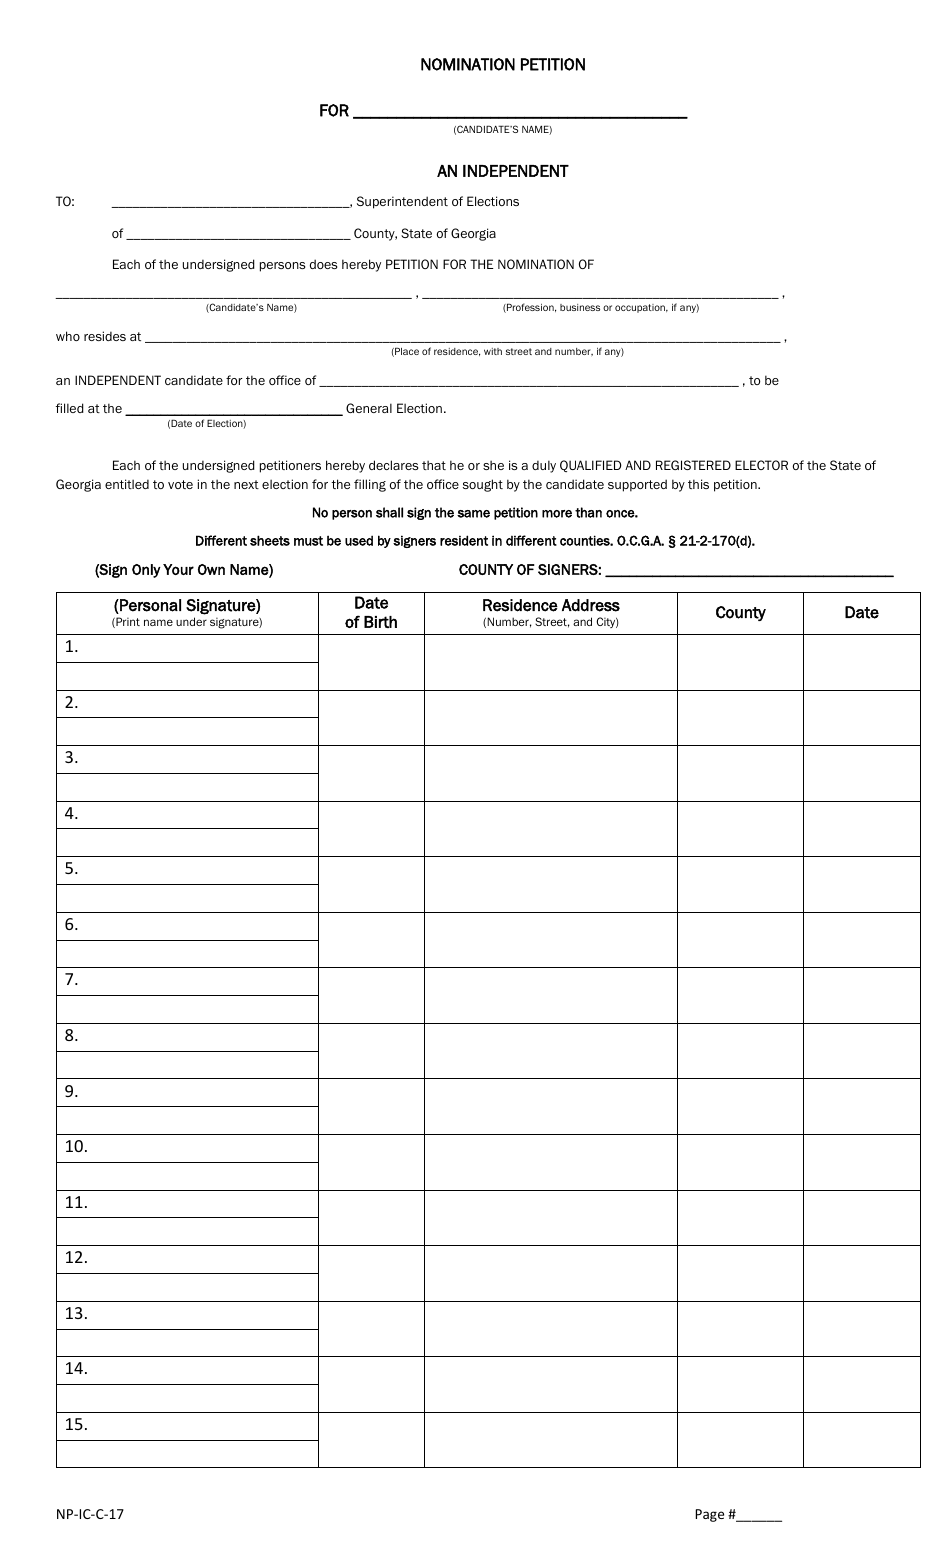 Form NP-IC-C-17 Nomination Petition (County) - Nonpartisan - Georgia (United States), Page 1